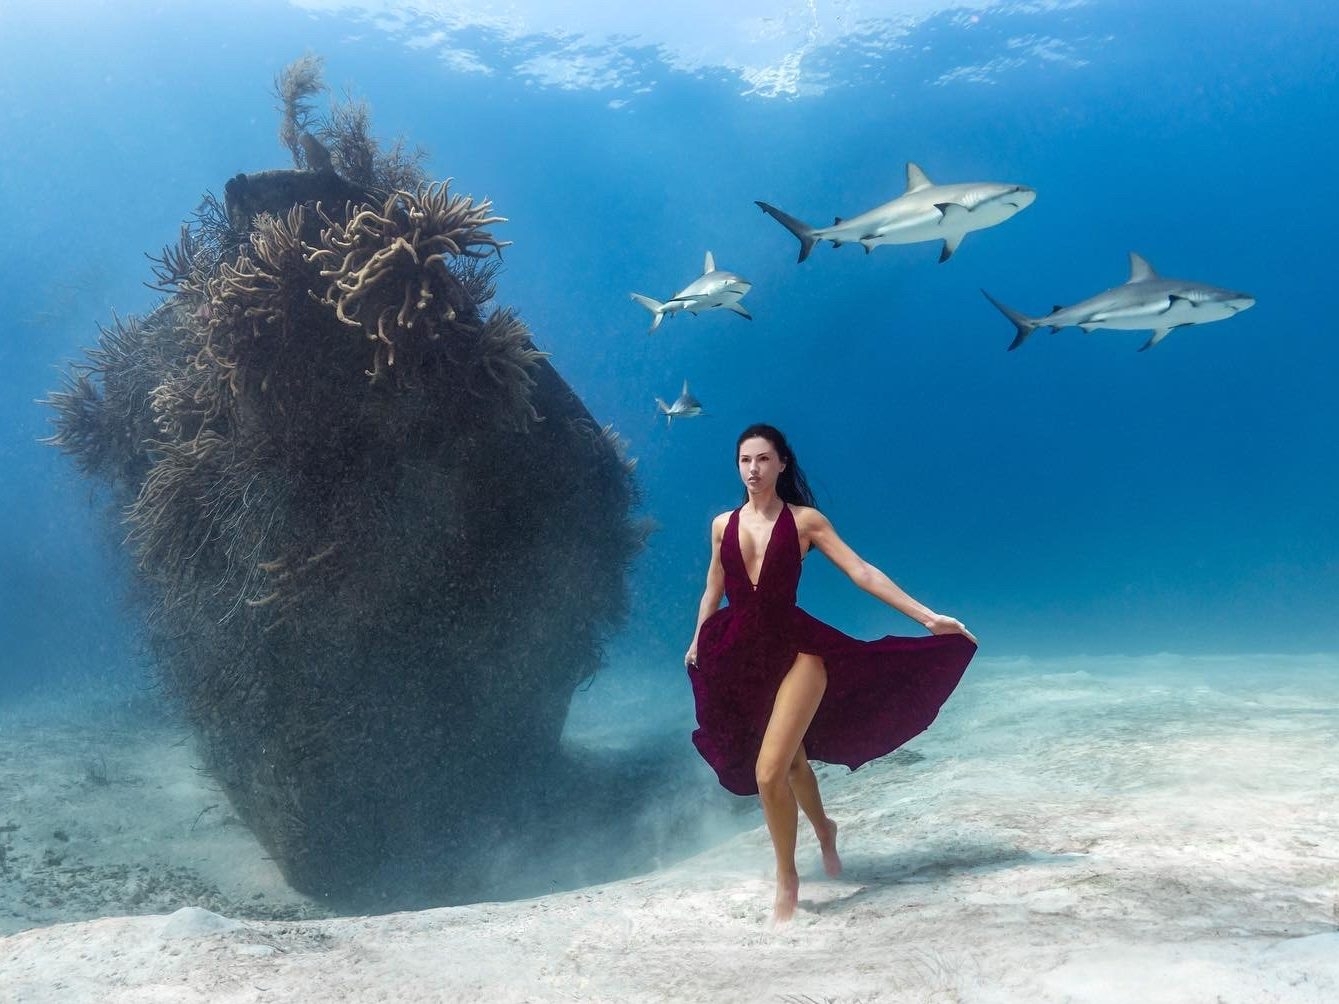 Canadian woman sets new record for deepest underwater photoshoot